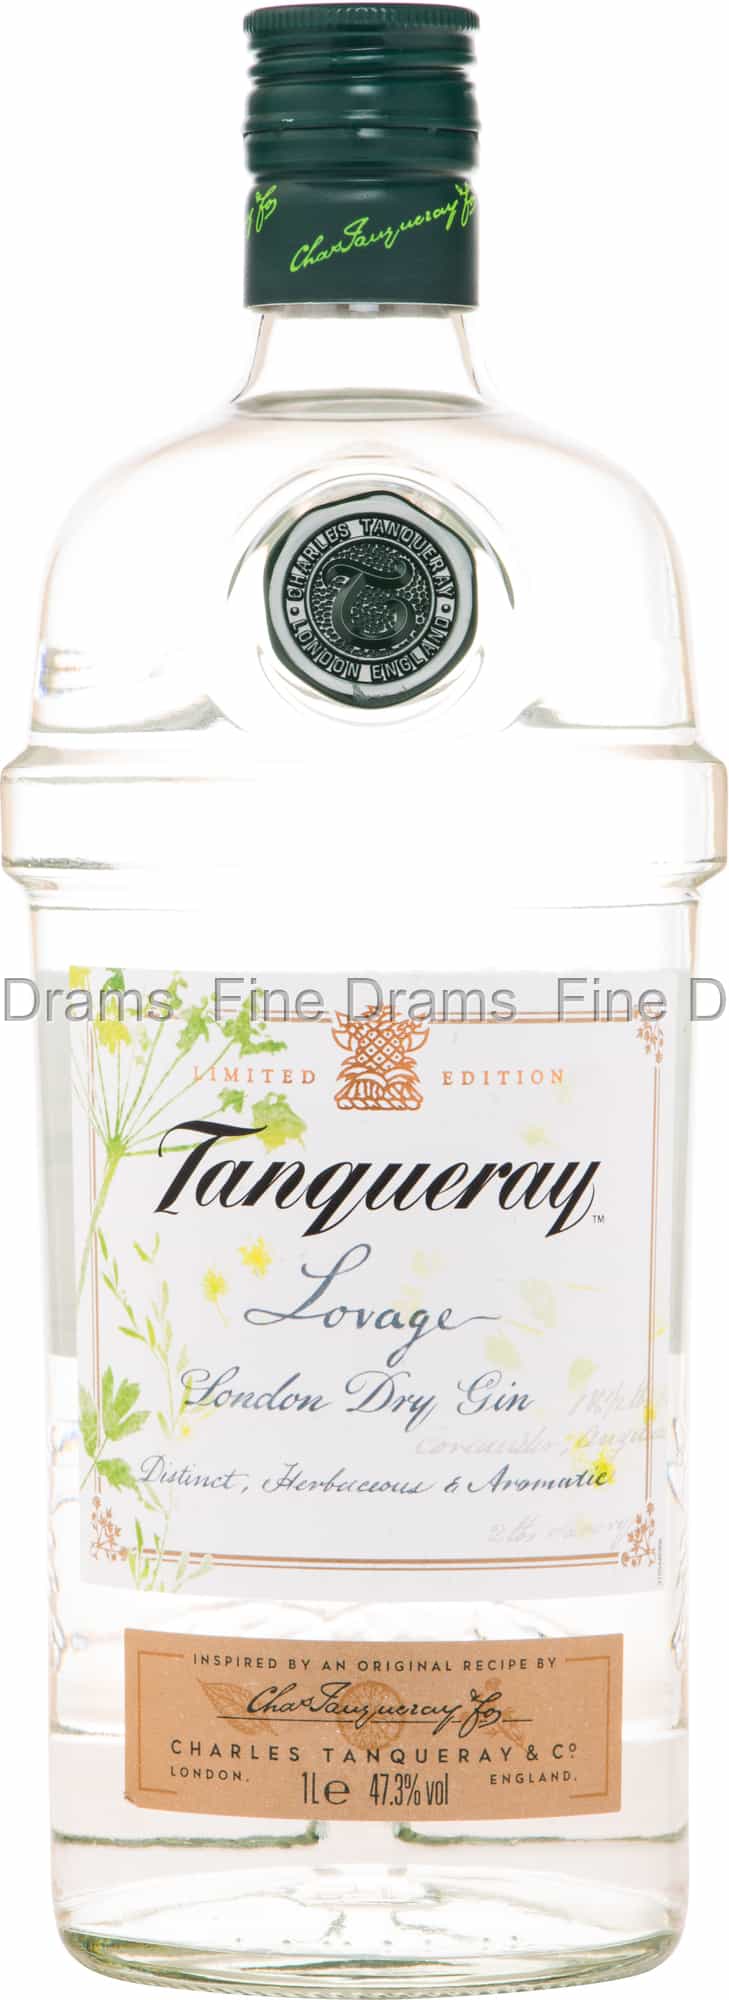 Gin Tanqueray (1 Liter) Lovage